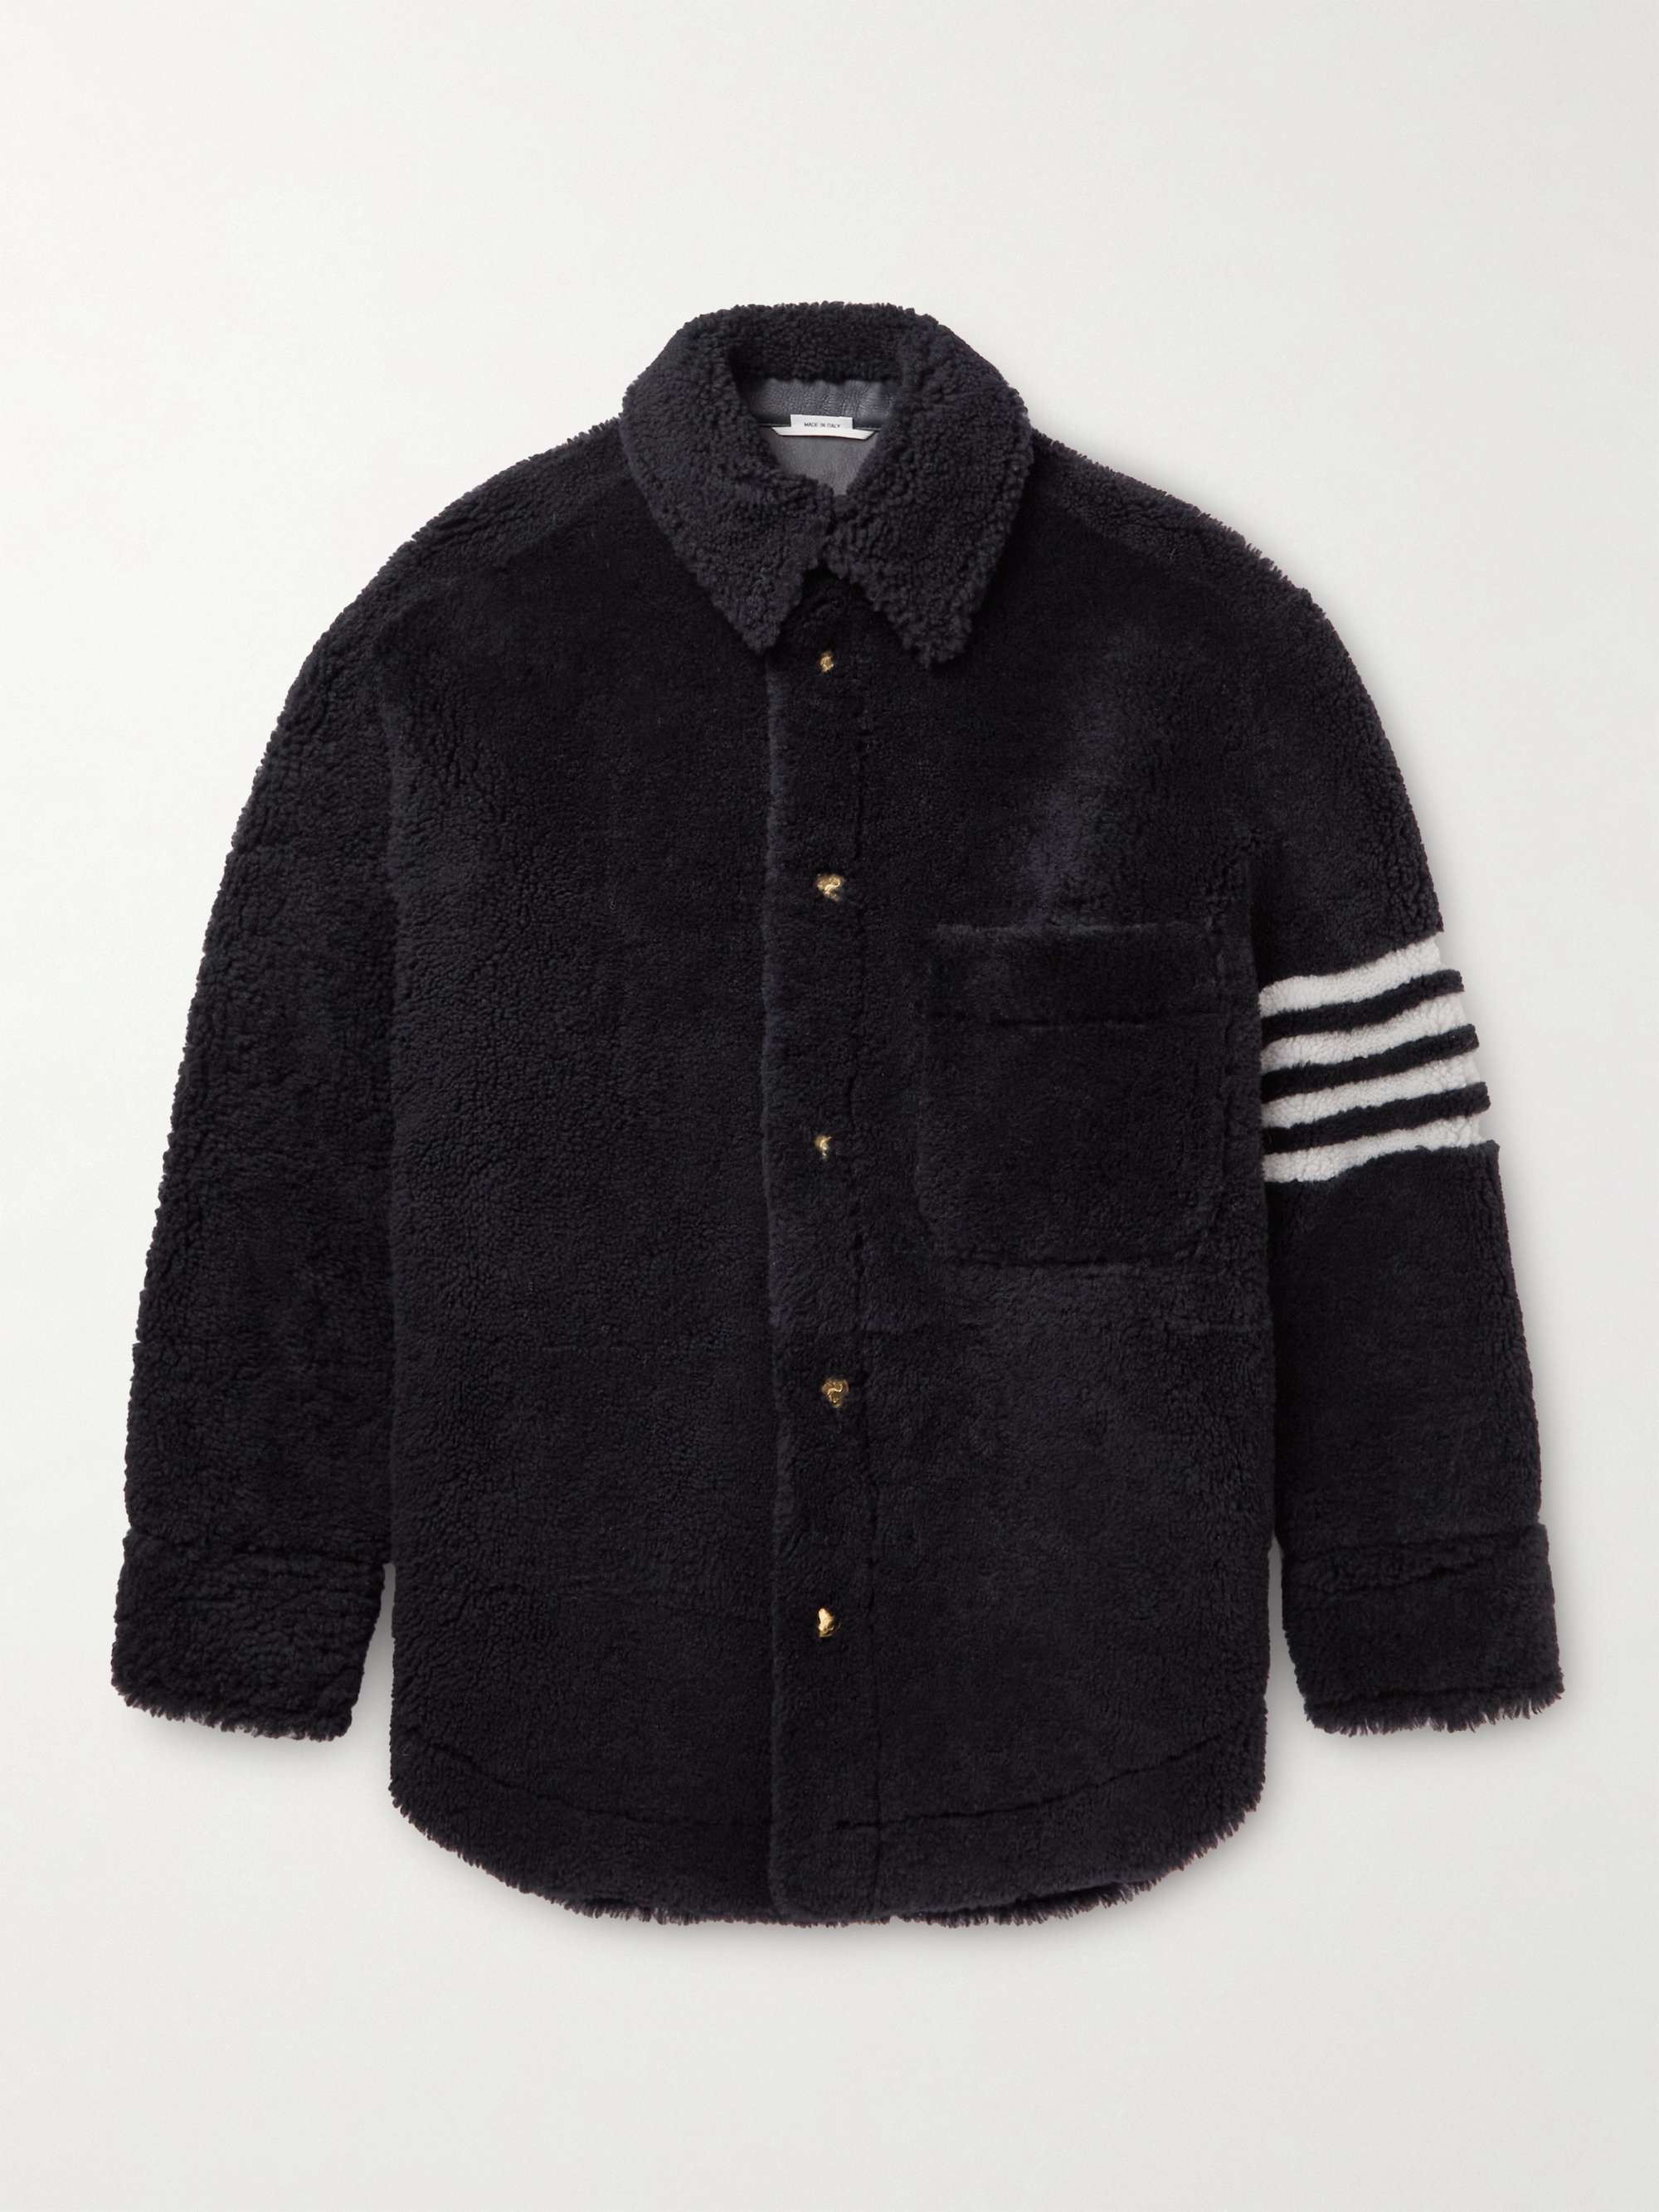 THOM BROWNE Oversized Striped Shearling Jacket